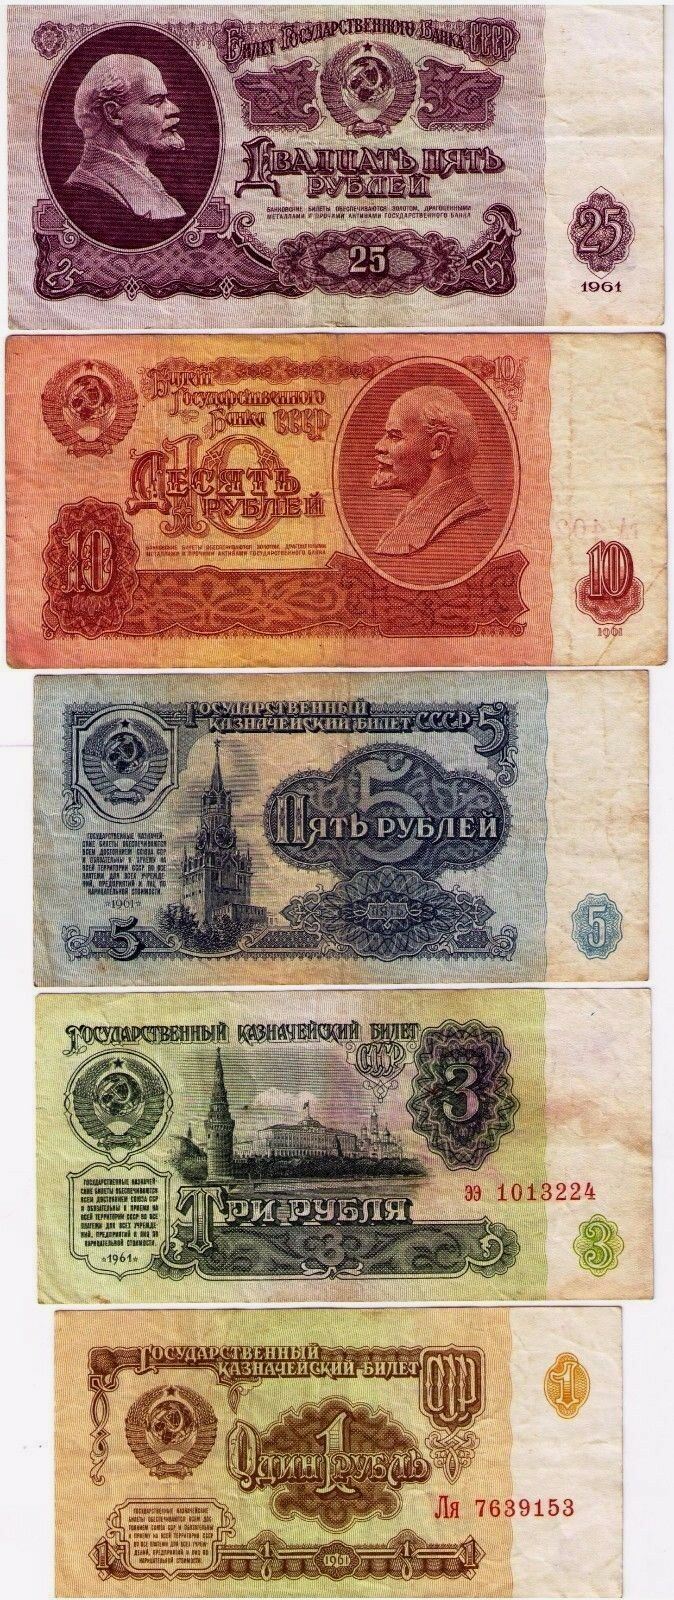 Full Soviet Union Money Collection: Coins and Banknotes | Rubles and Kopeks